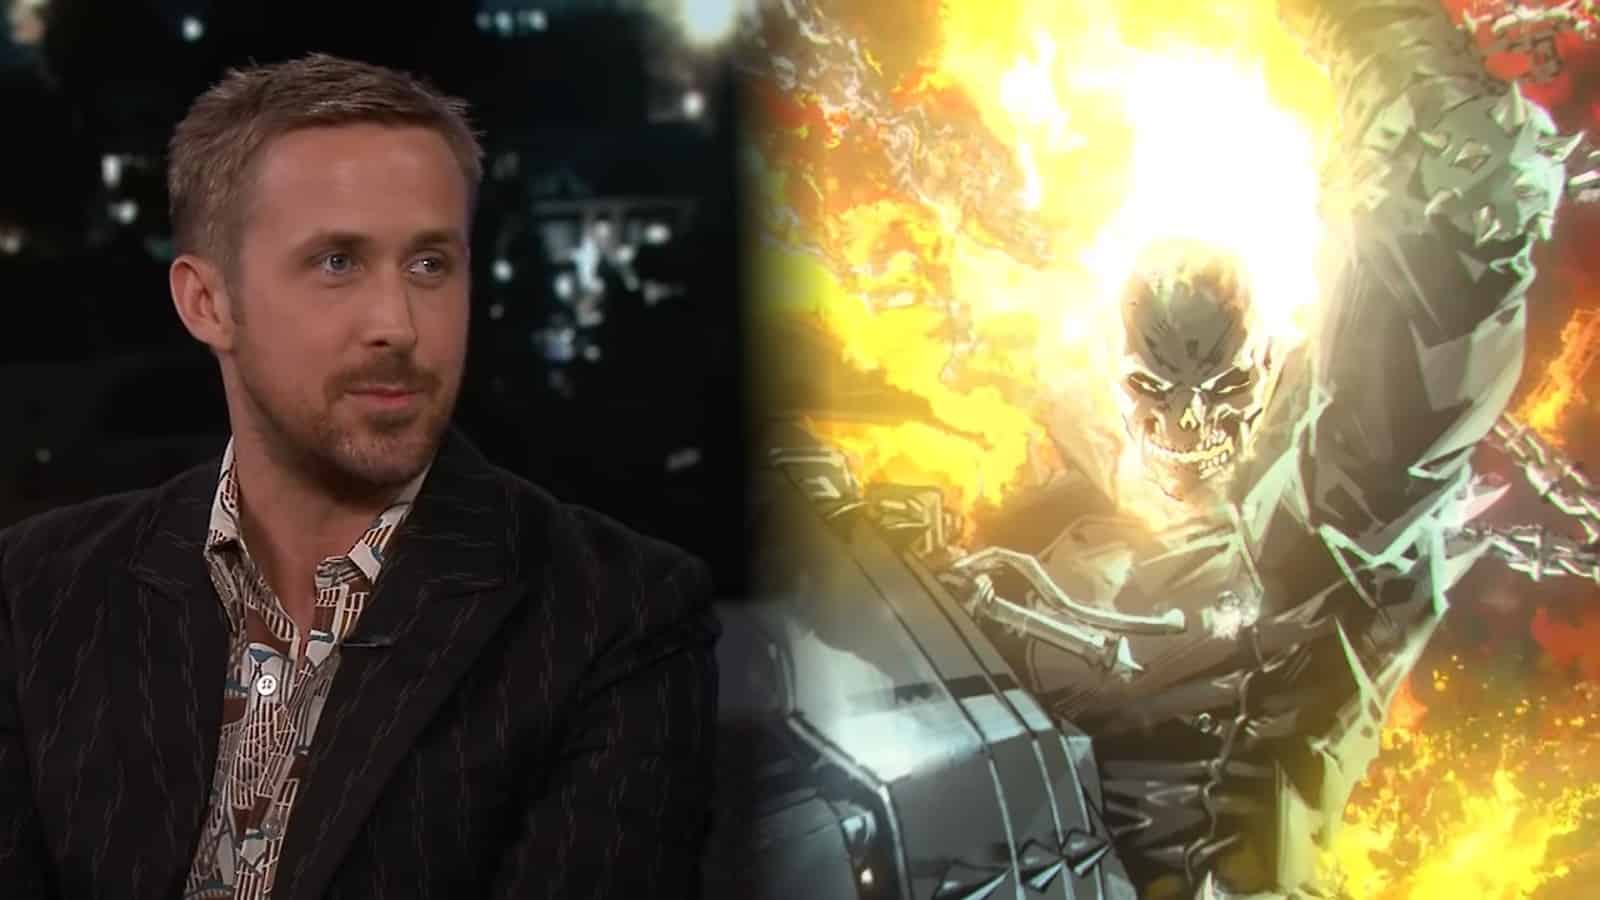 Marvel would welcome Ryan Gosling in MCU after Ghost Rider comments